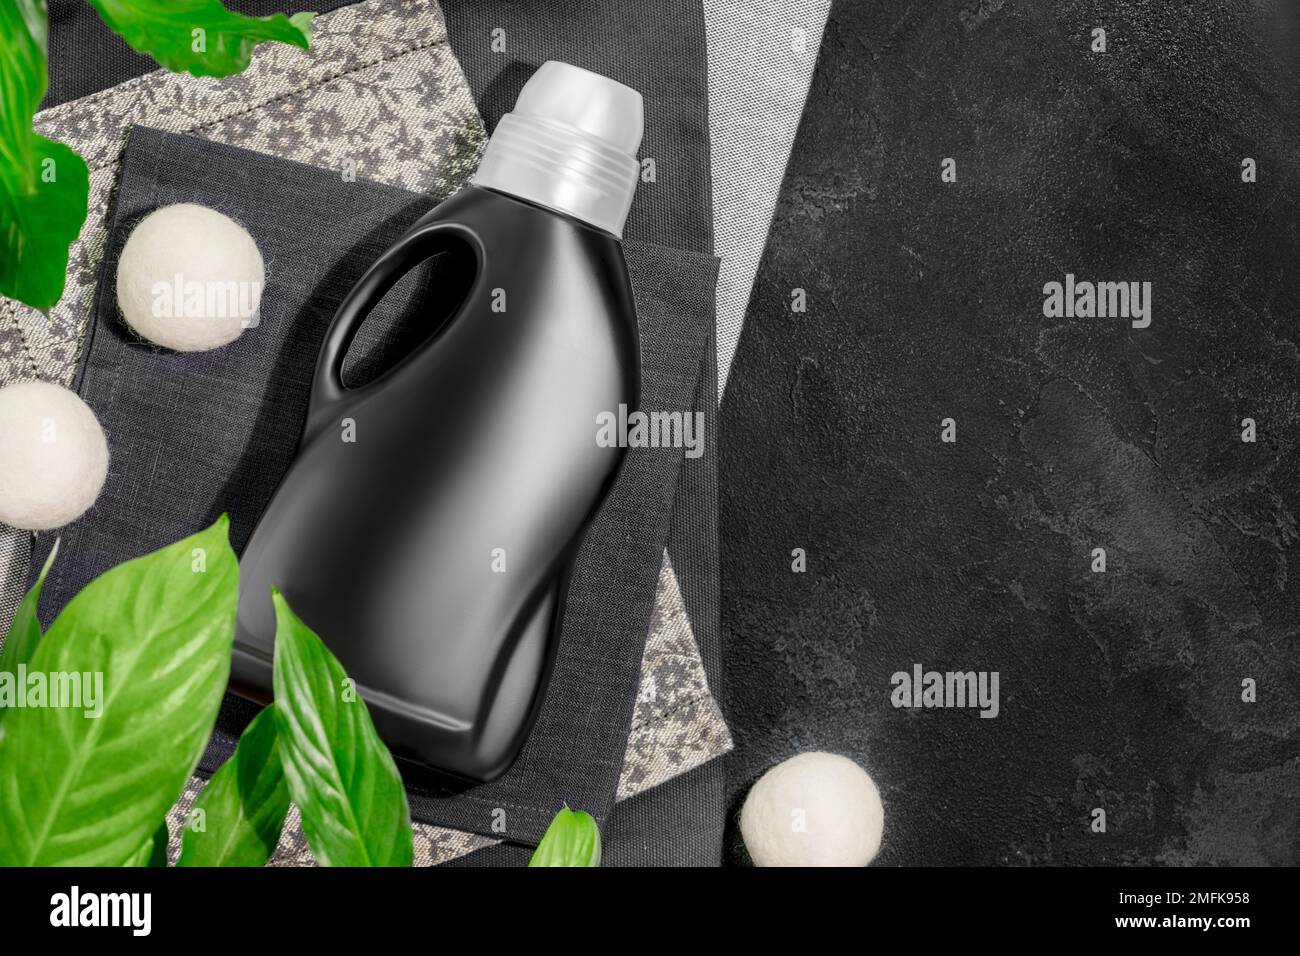 Natural laundry detergent mockup for washing black clothes. Washing detergent concept with bottle of washing gel or fabric softener on textile napkins Stock Photo